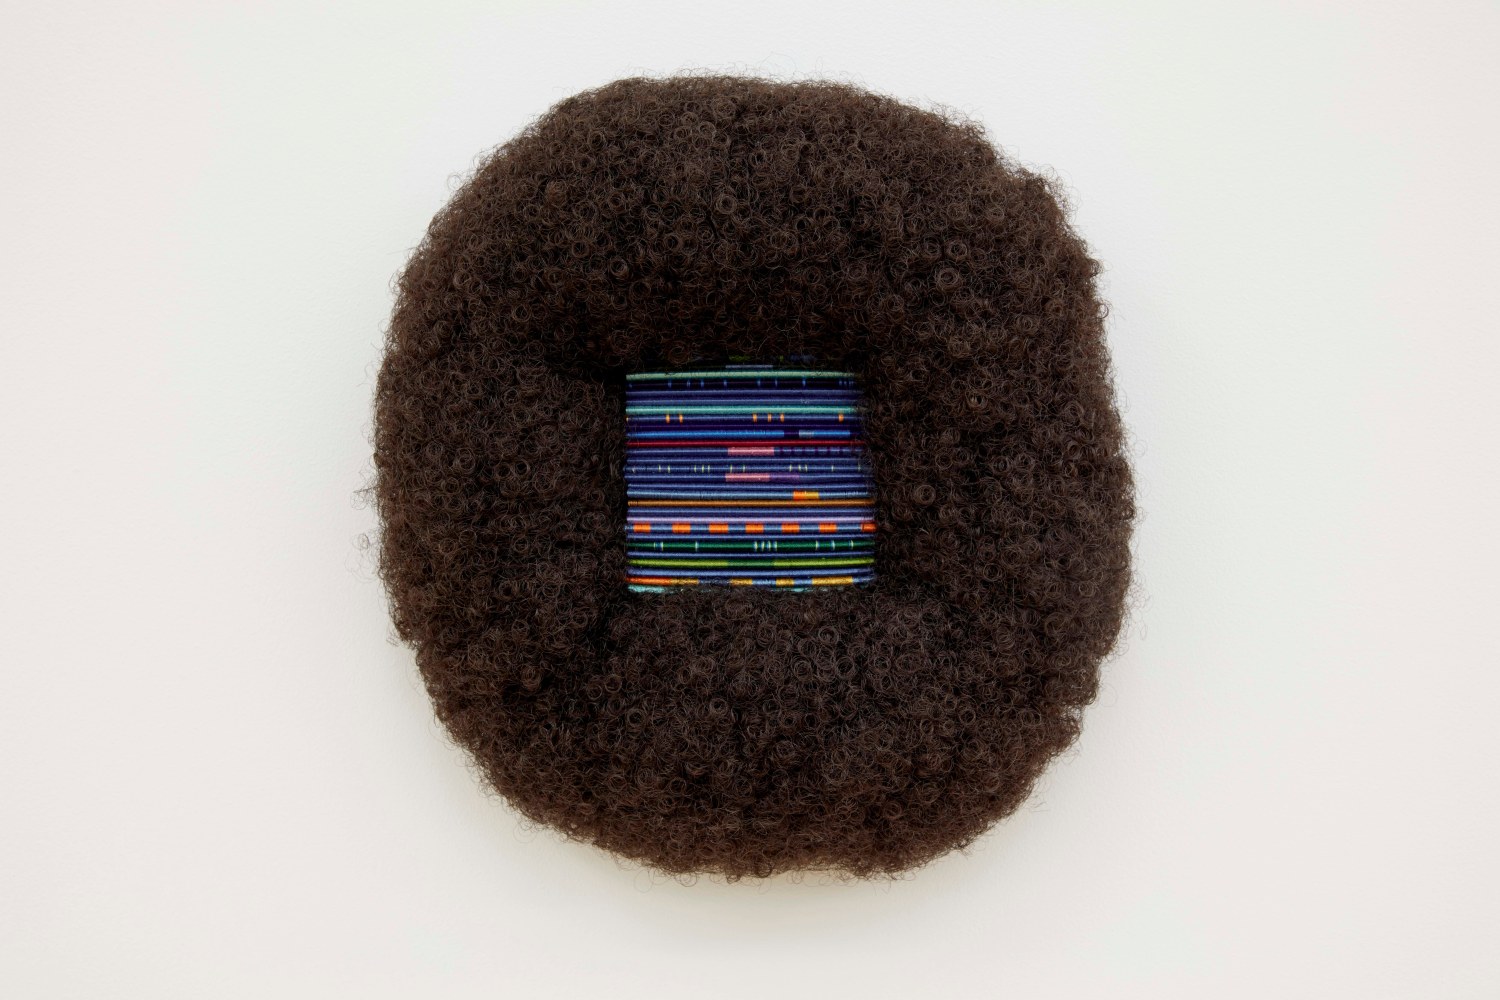 Sonya Clark

For Colored Girls, A Rainbow B1, 2019

wig, cast plastic combs and wrapped thread

12 x 12 x 3 inches (30.5 x 30.5 x 7.6 cm)

(SCL19-01)